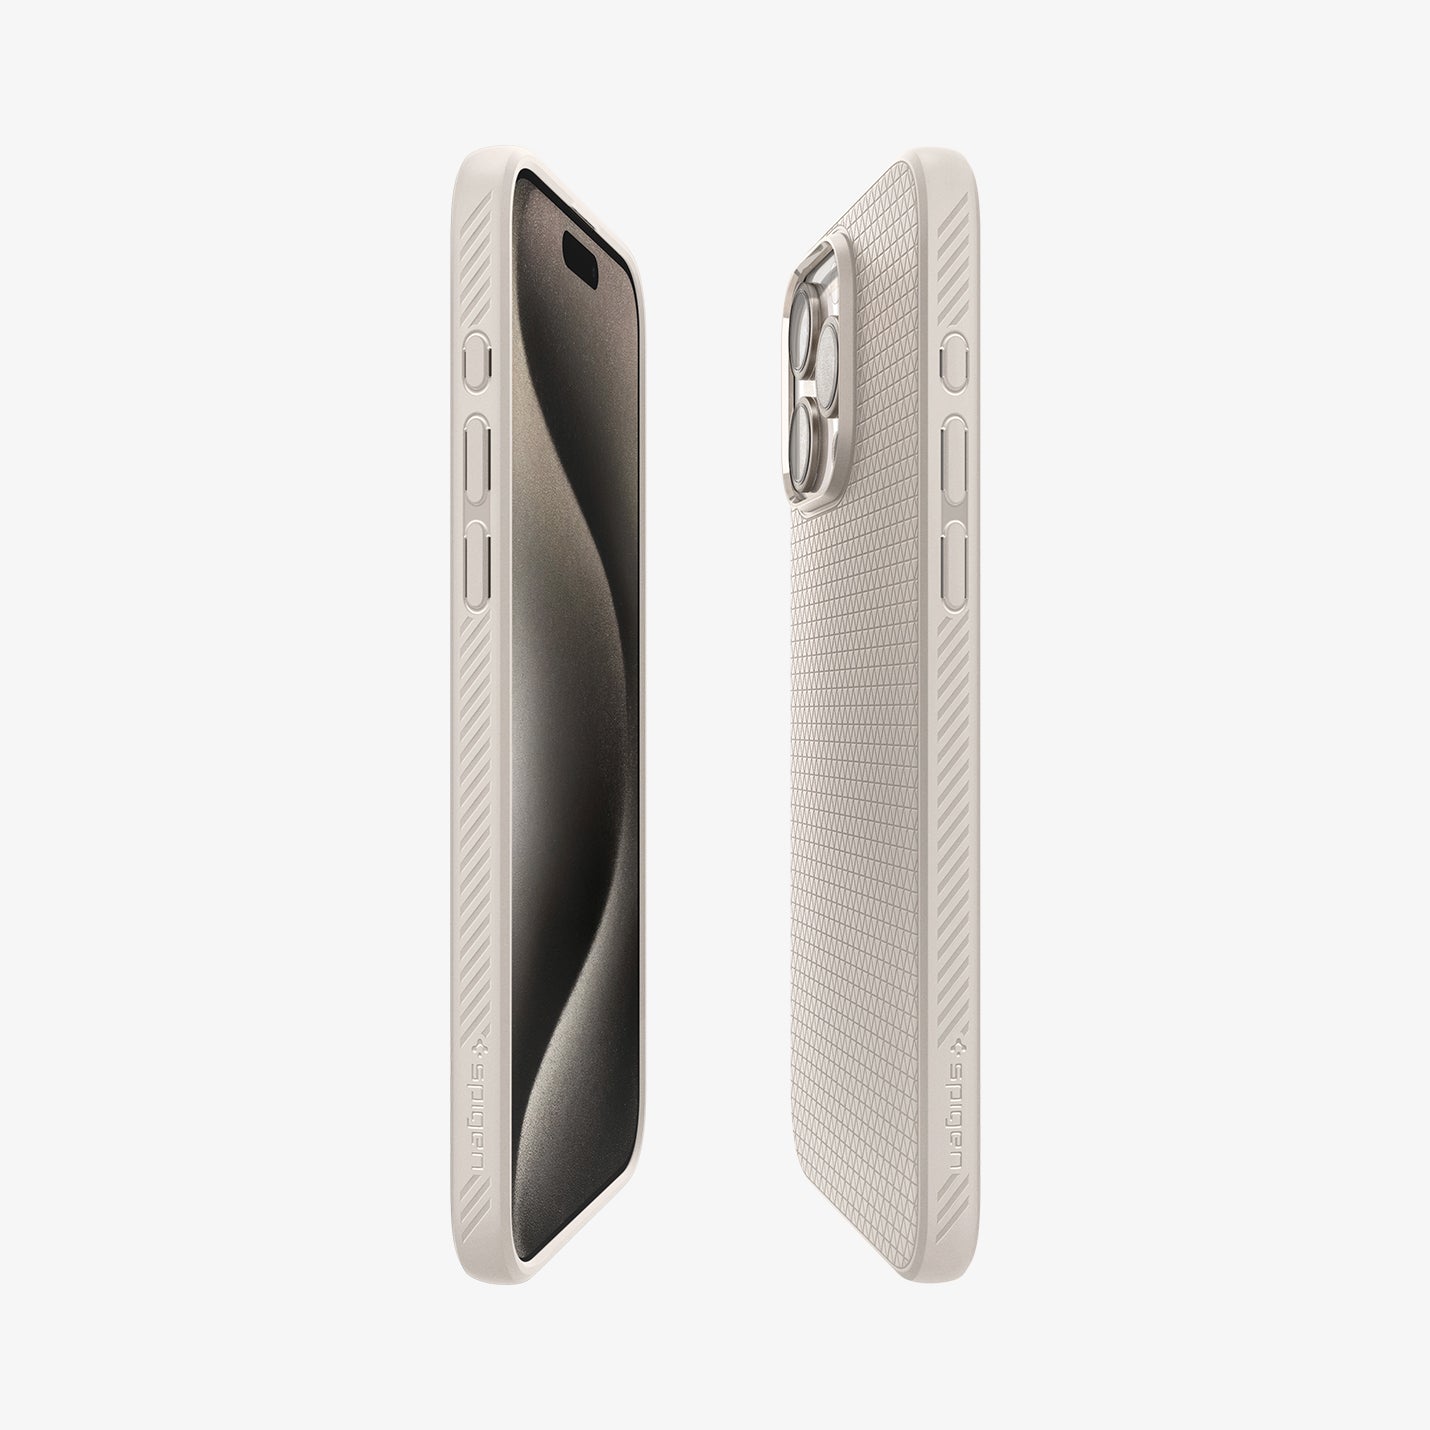 ACS07212 - iPhone 15 Pro Max Case Liquid Air in Natural Titanium showing the partial front, partial back and sides of both devices facing each other